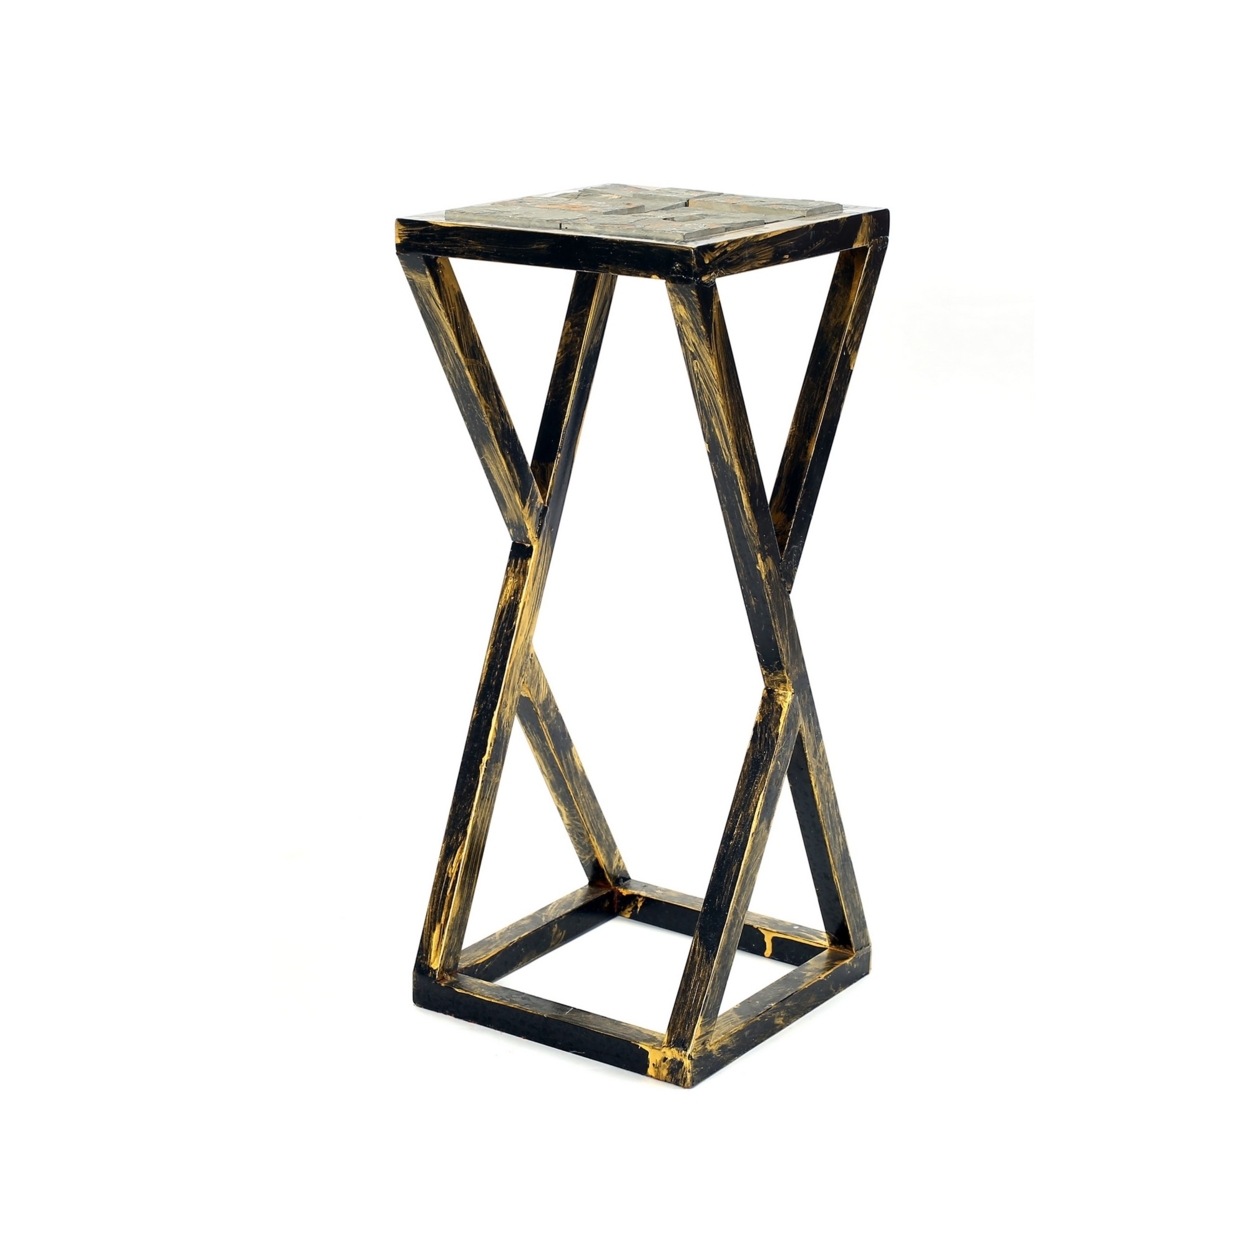 19.5 Inches Stone Top Plant Stand With Geometric Base, Black And Gray- Saltoro Sherpi